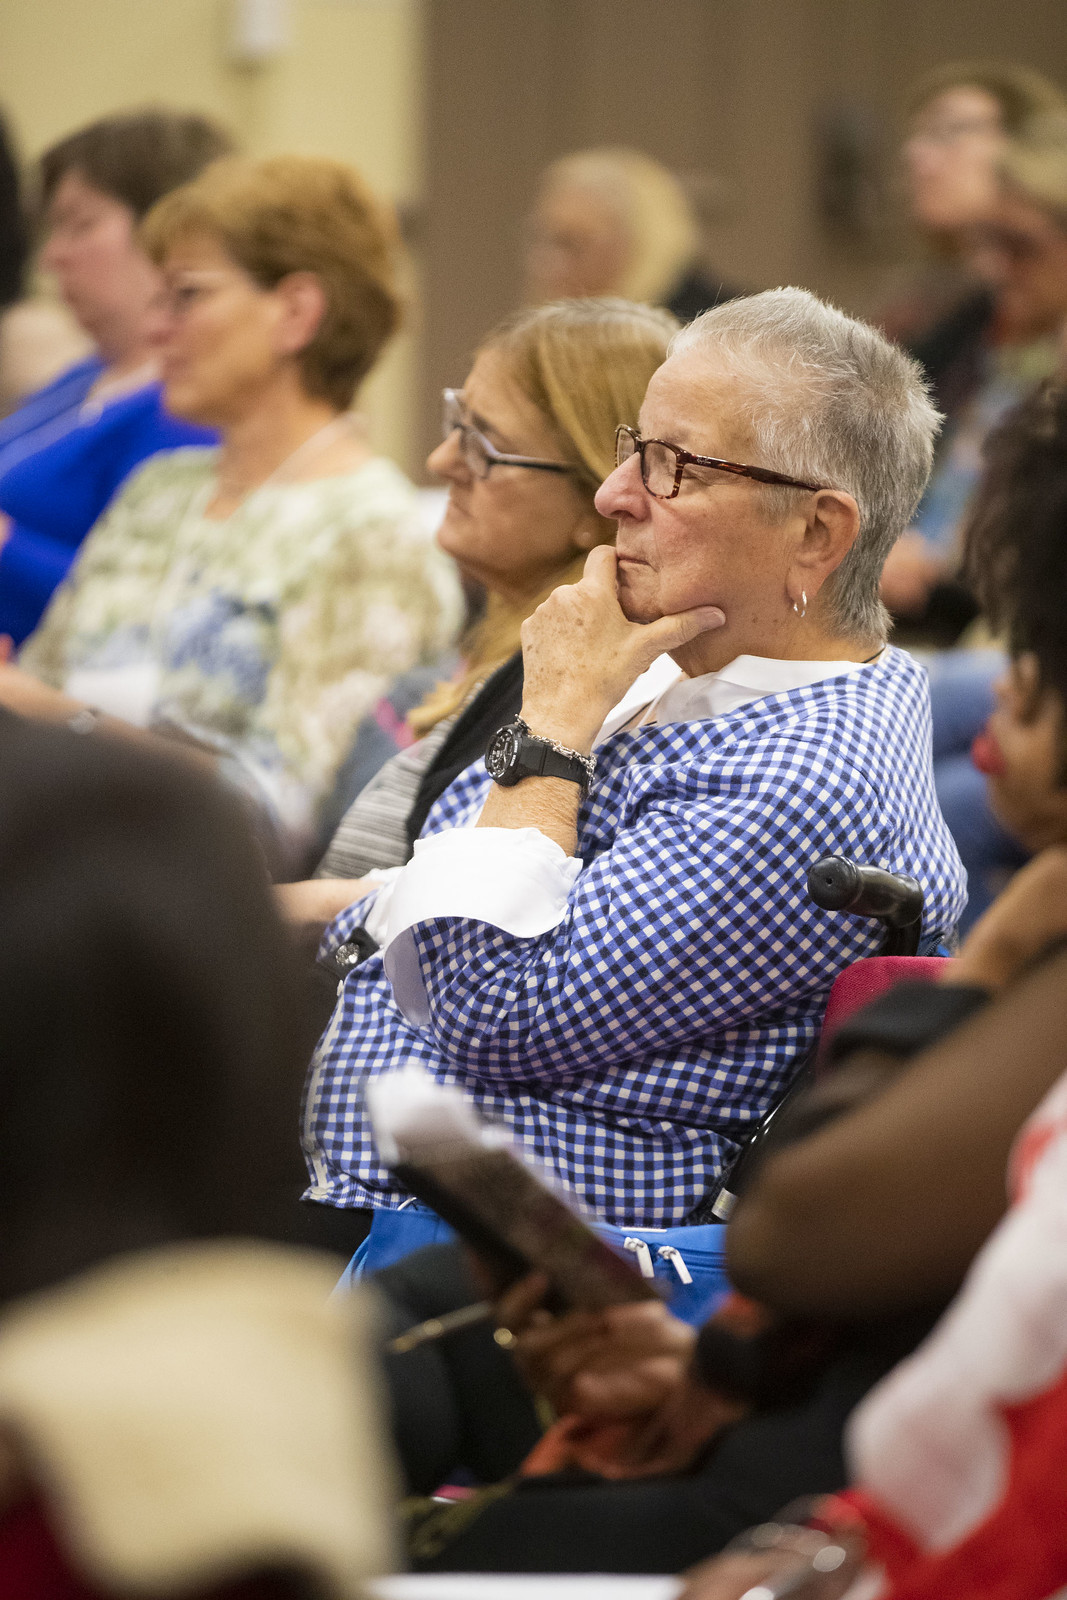 2019 Women in Ministry Conference